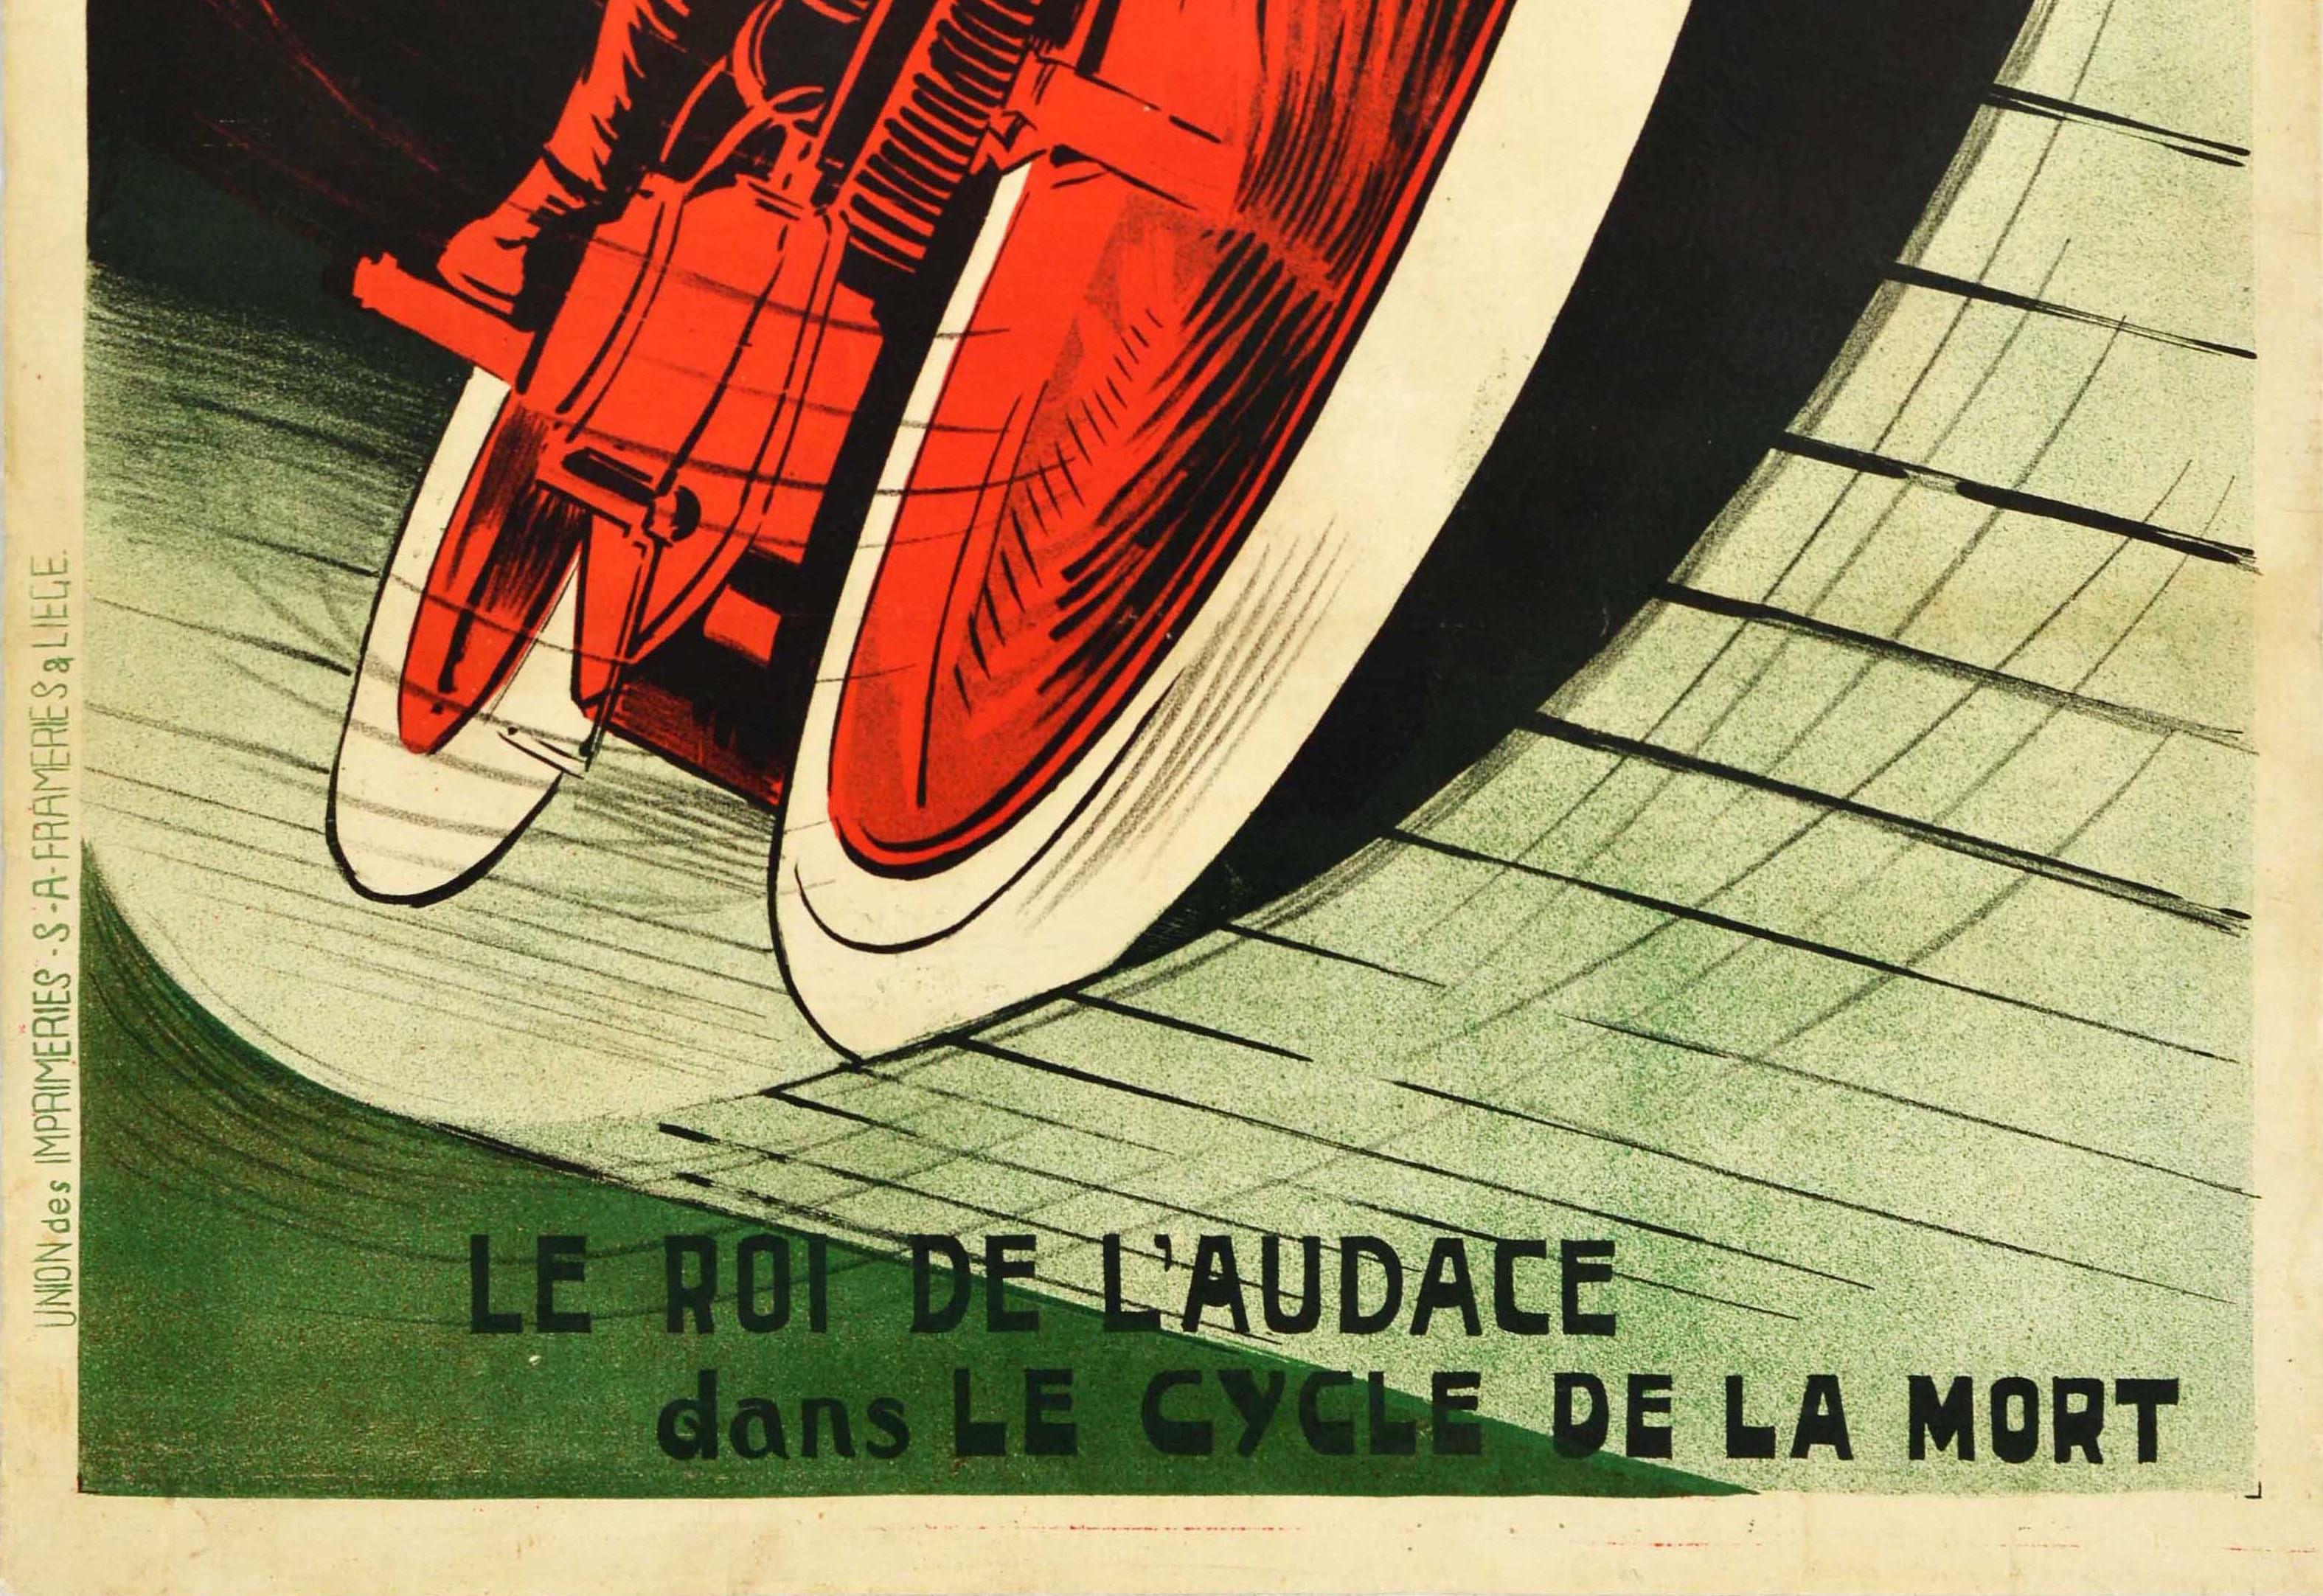 Original antique circus advertising poster for Deen Le Demon Rouge Le roi de l'audace dans le cycle de la mort / The red devil The king of daring in the cycle of death featuring a dynamic design in red depicting a man with a green beard and white